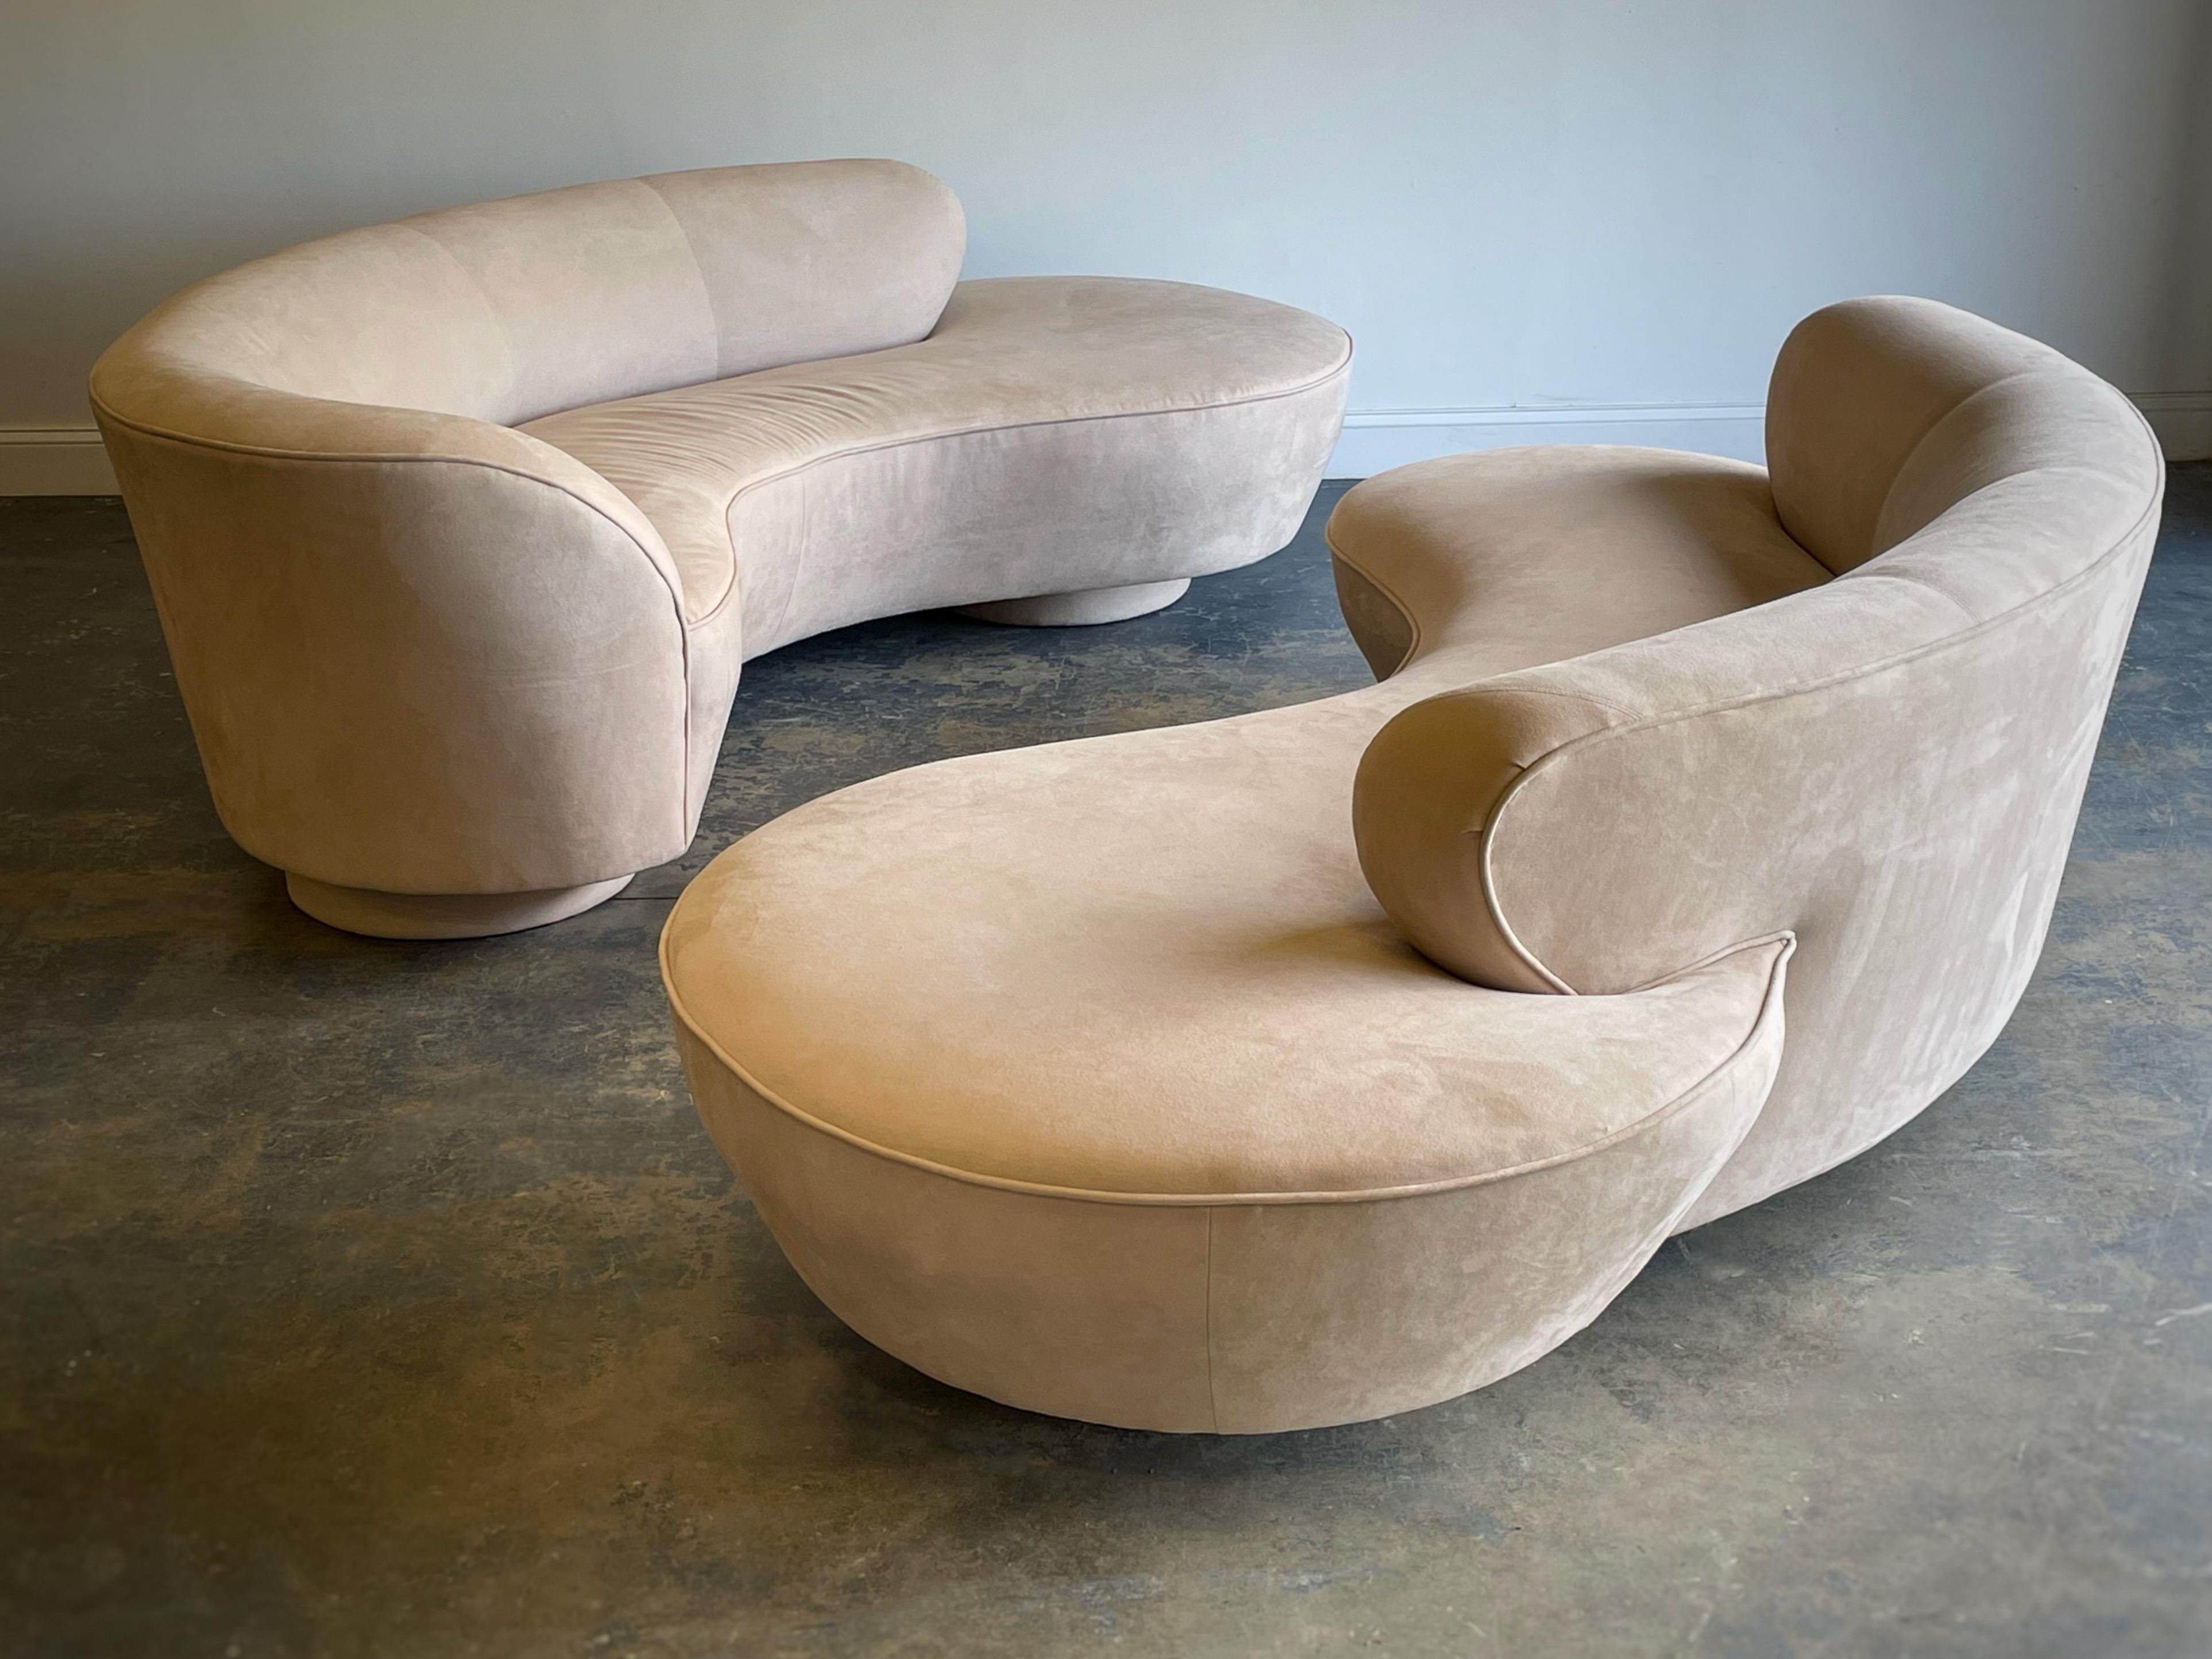 Original pair of matched Vladimir Kagan sofas for Directional. Iconic serpentine freeform design, one of which having an arm. Upholstered base with Lucite center support. Directional tags present.